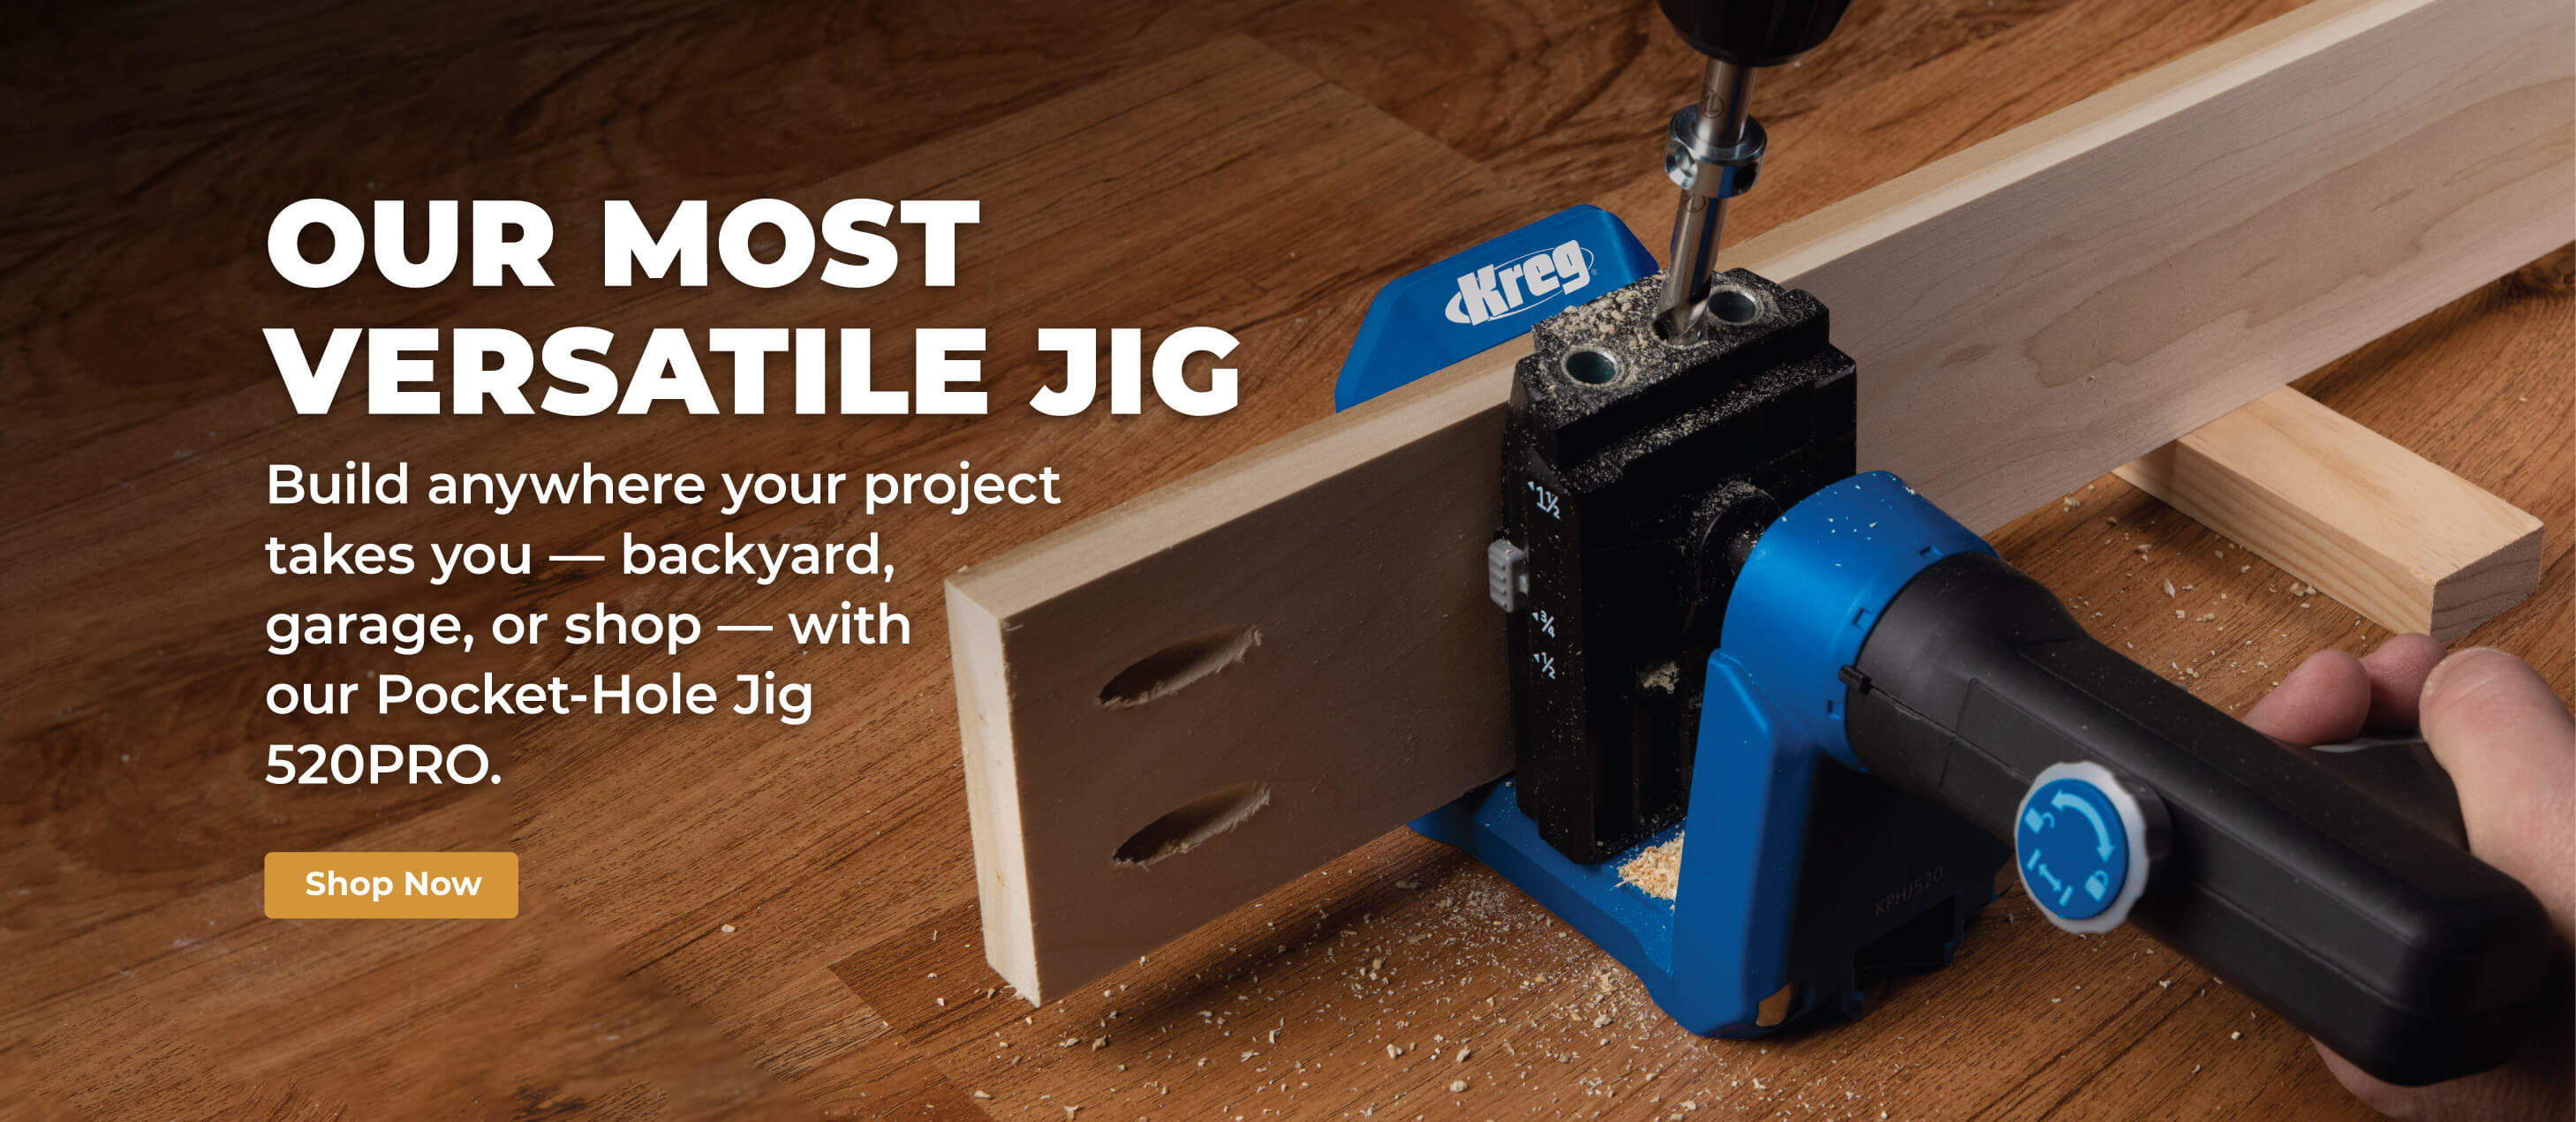 Our most versatile jig